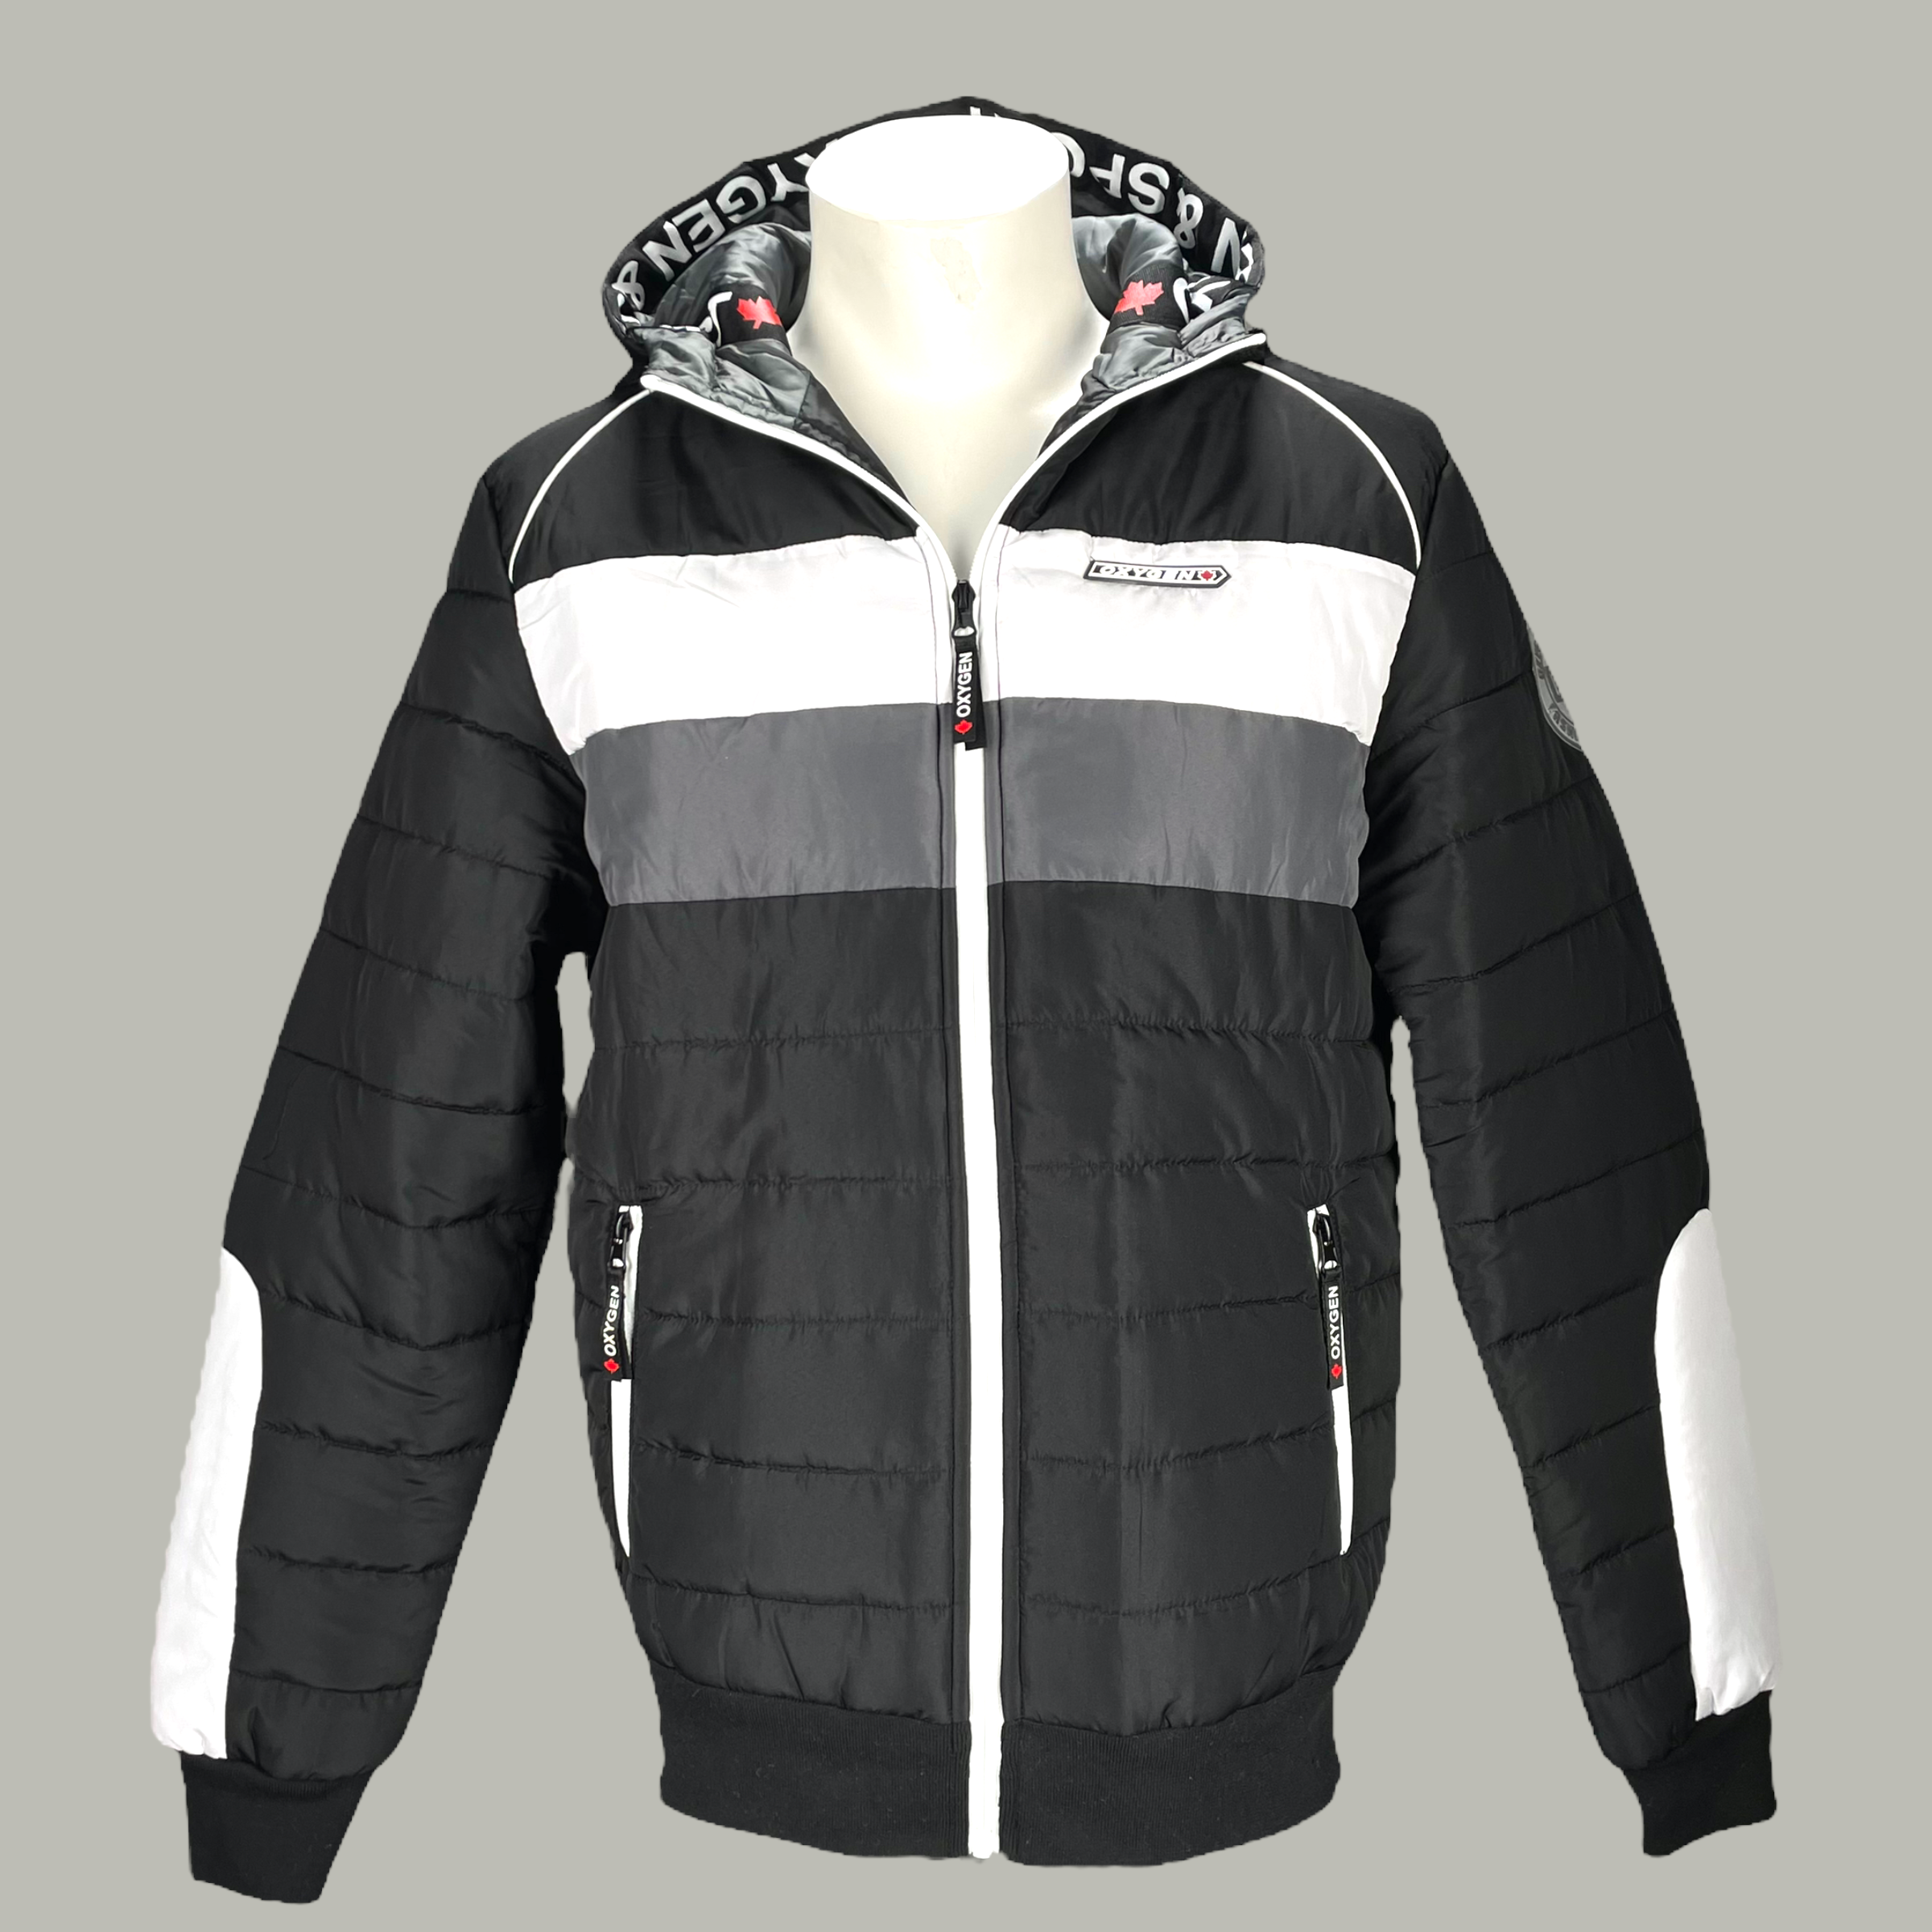 MS100-437 BLK WIND JACKET WITH CORD